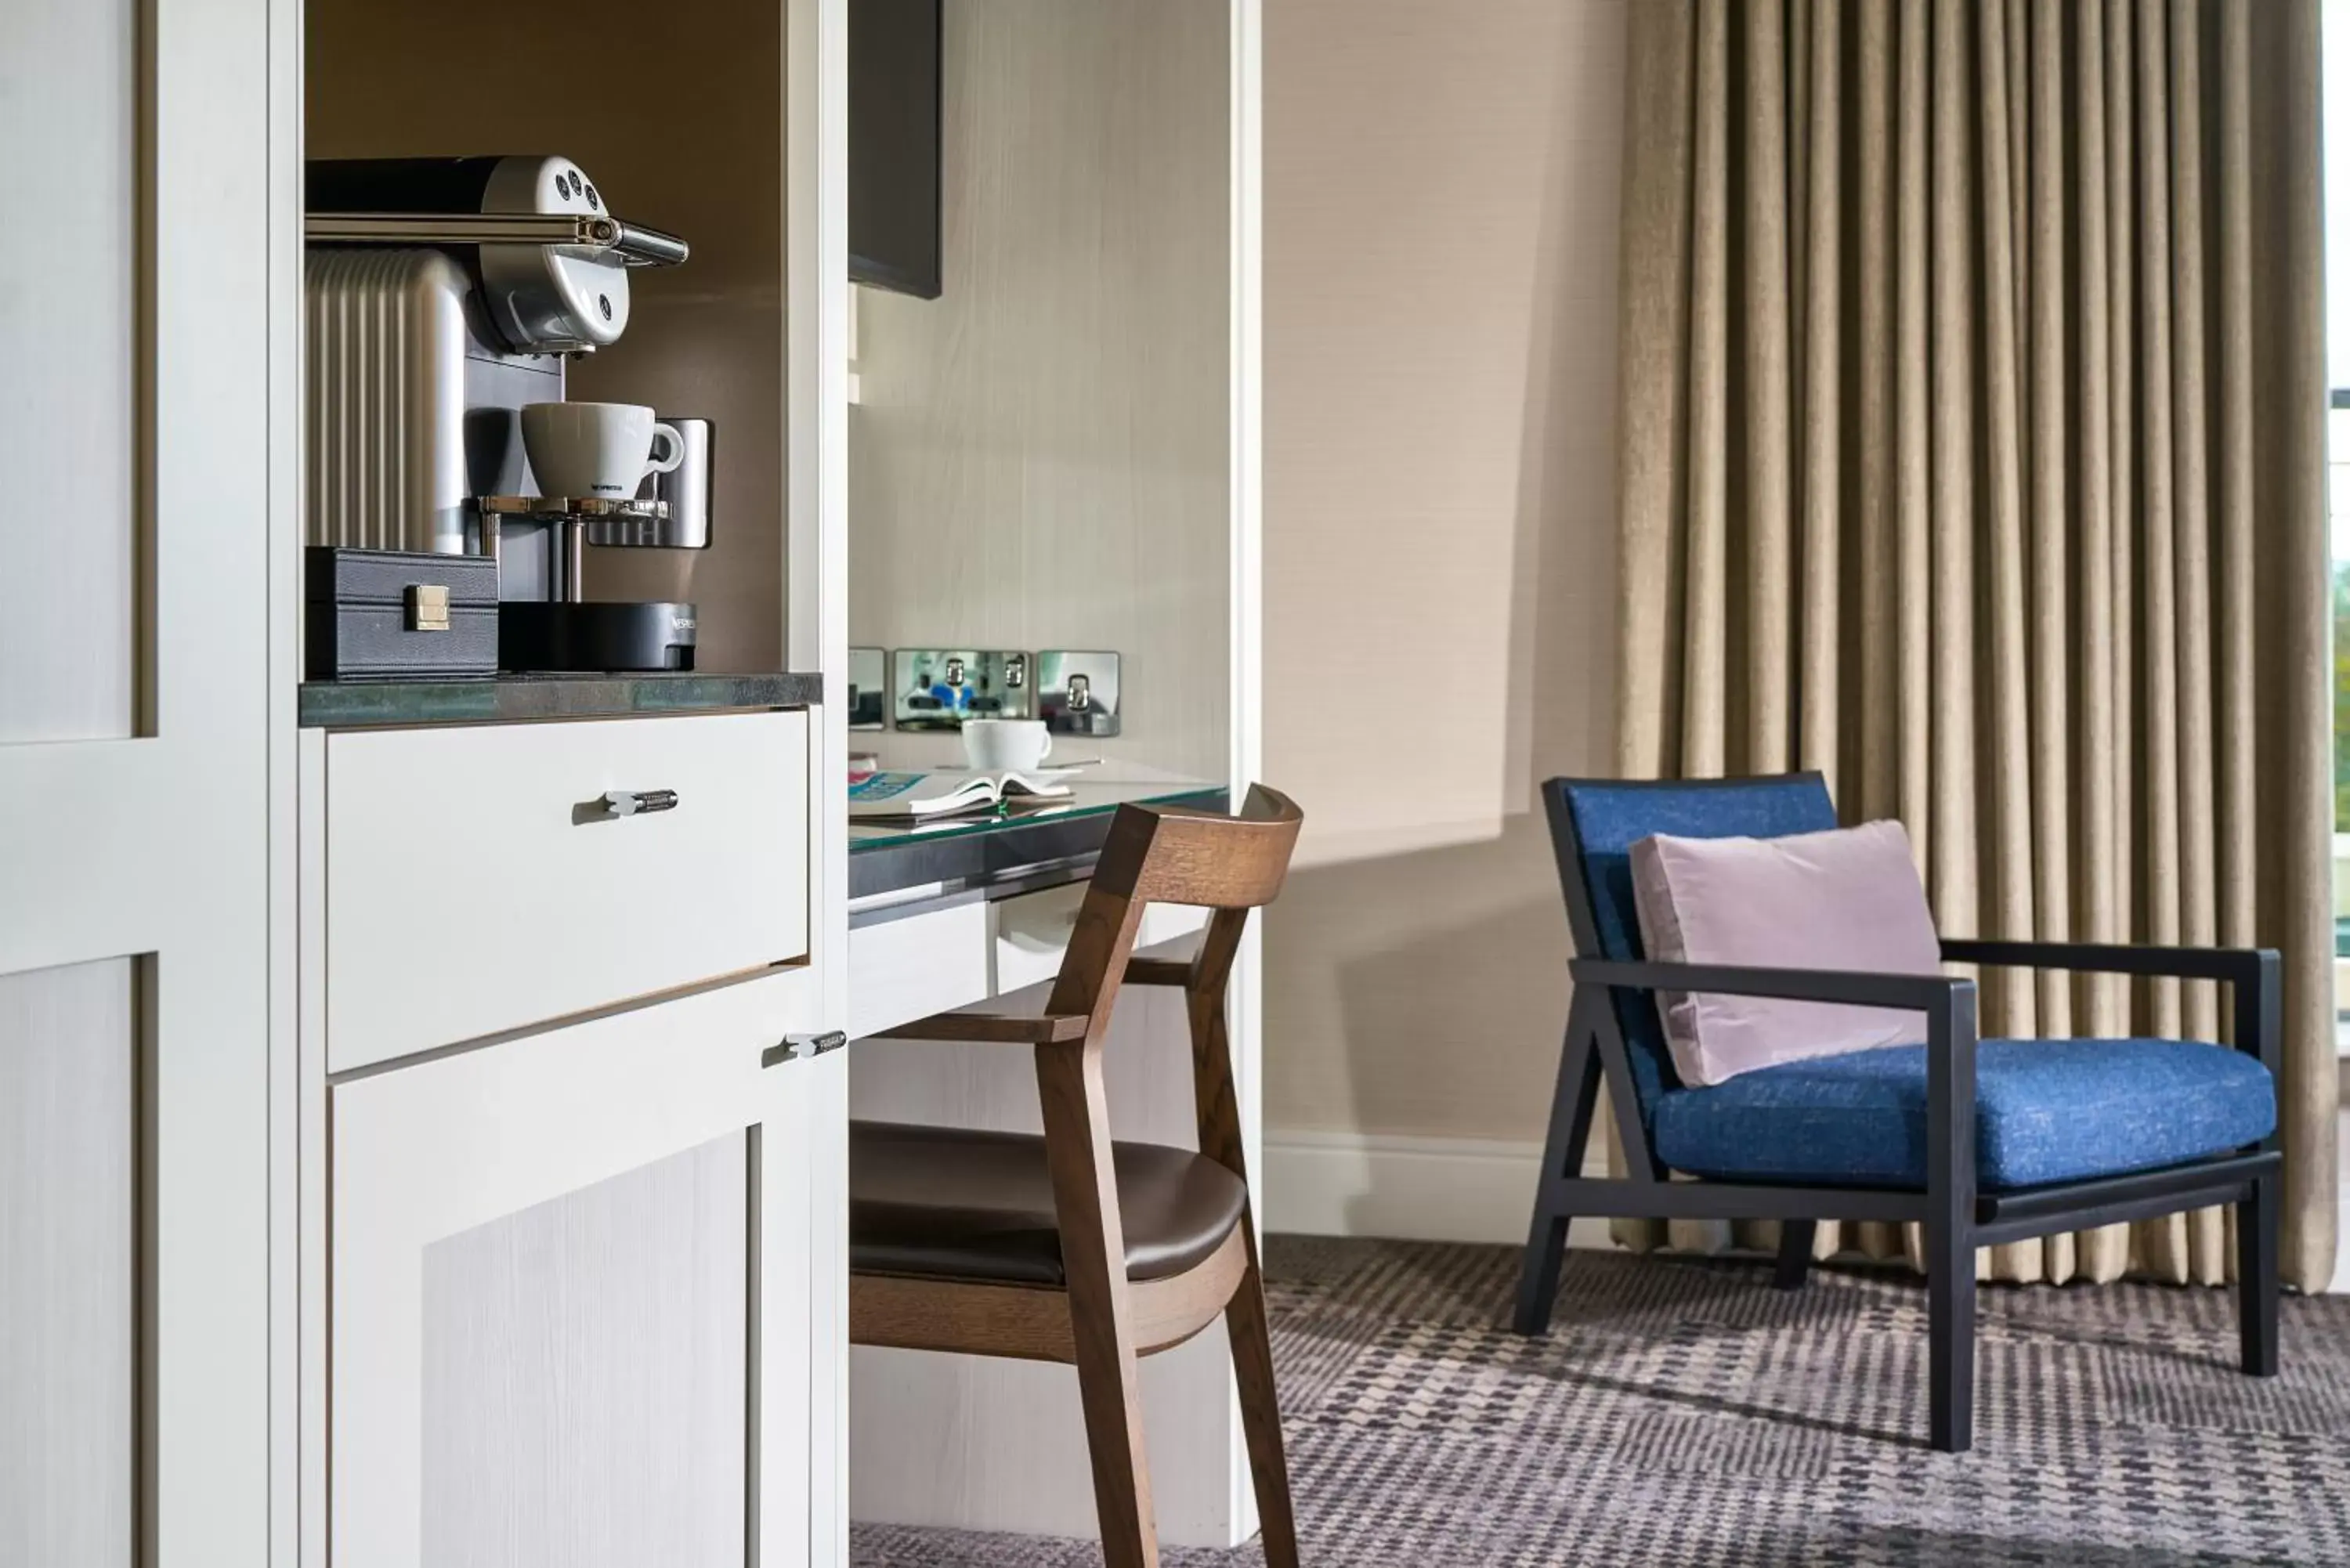 Coffee/tea facilities, Dining Area in Herbert Park Hotel and Park Residence